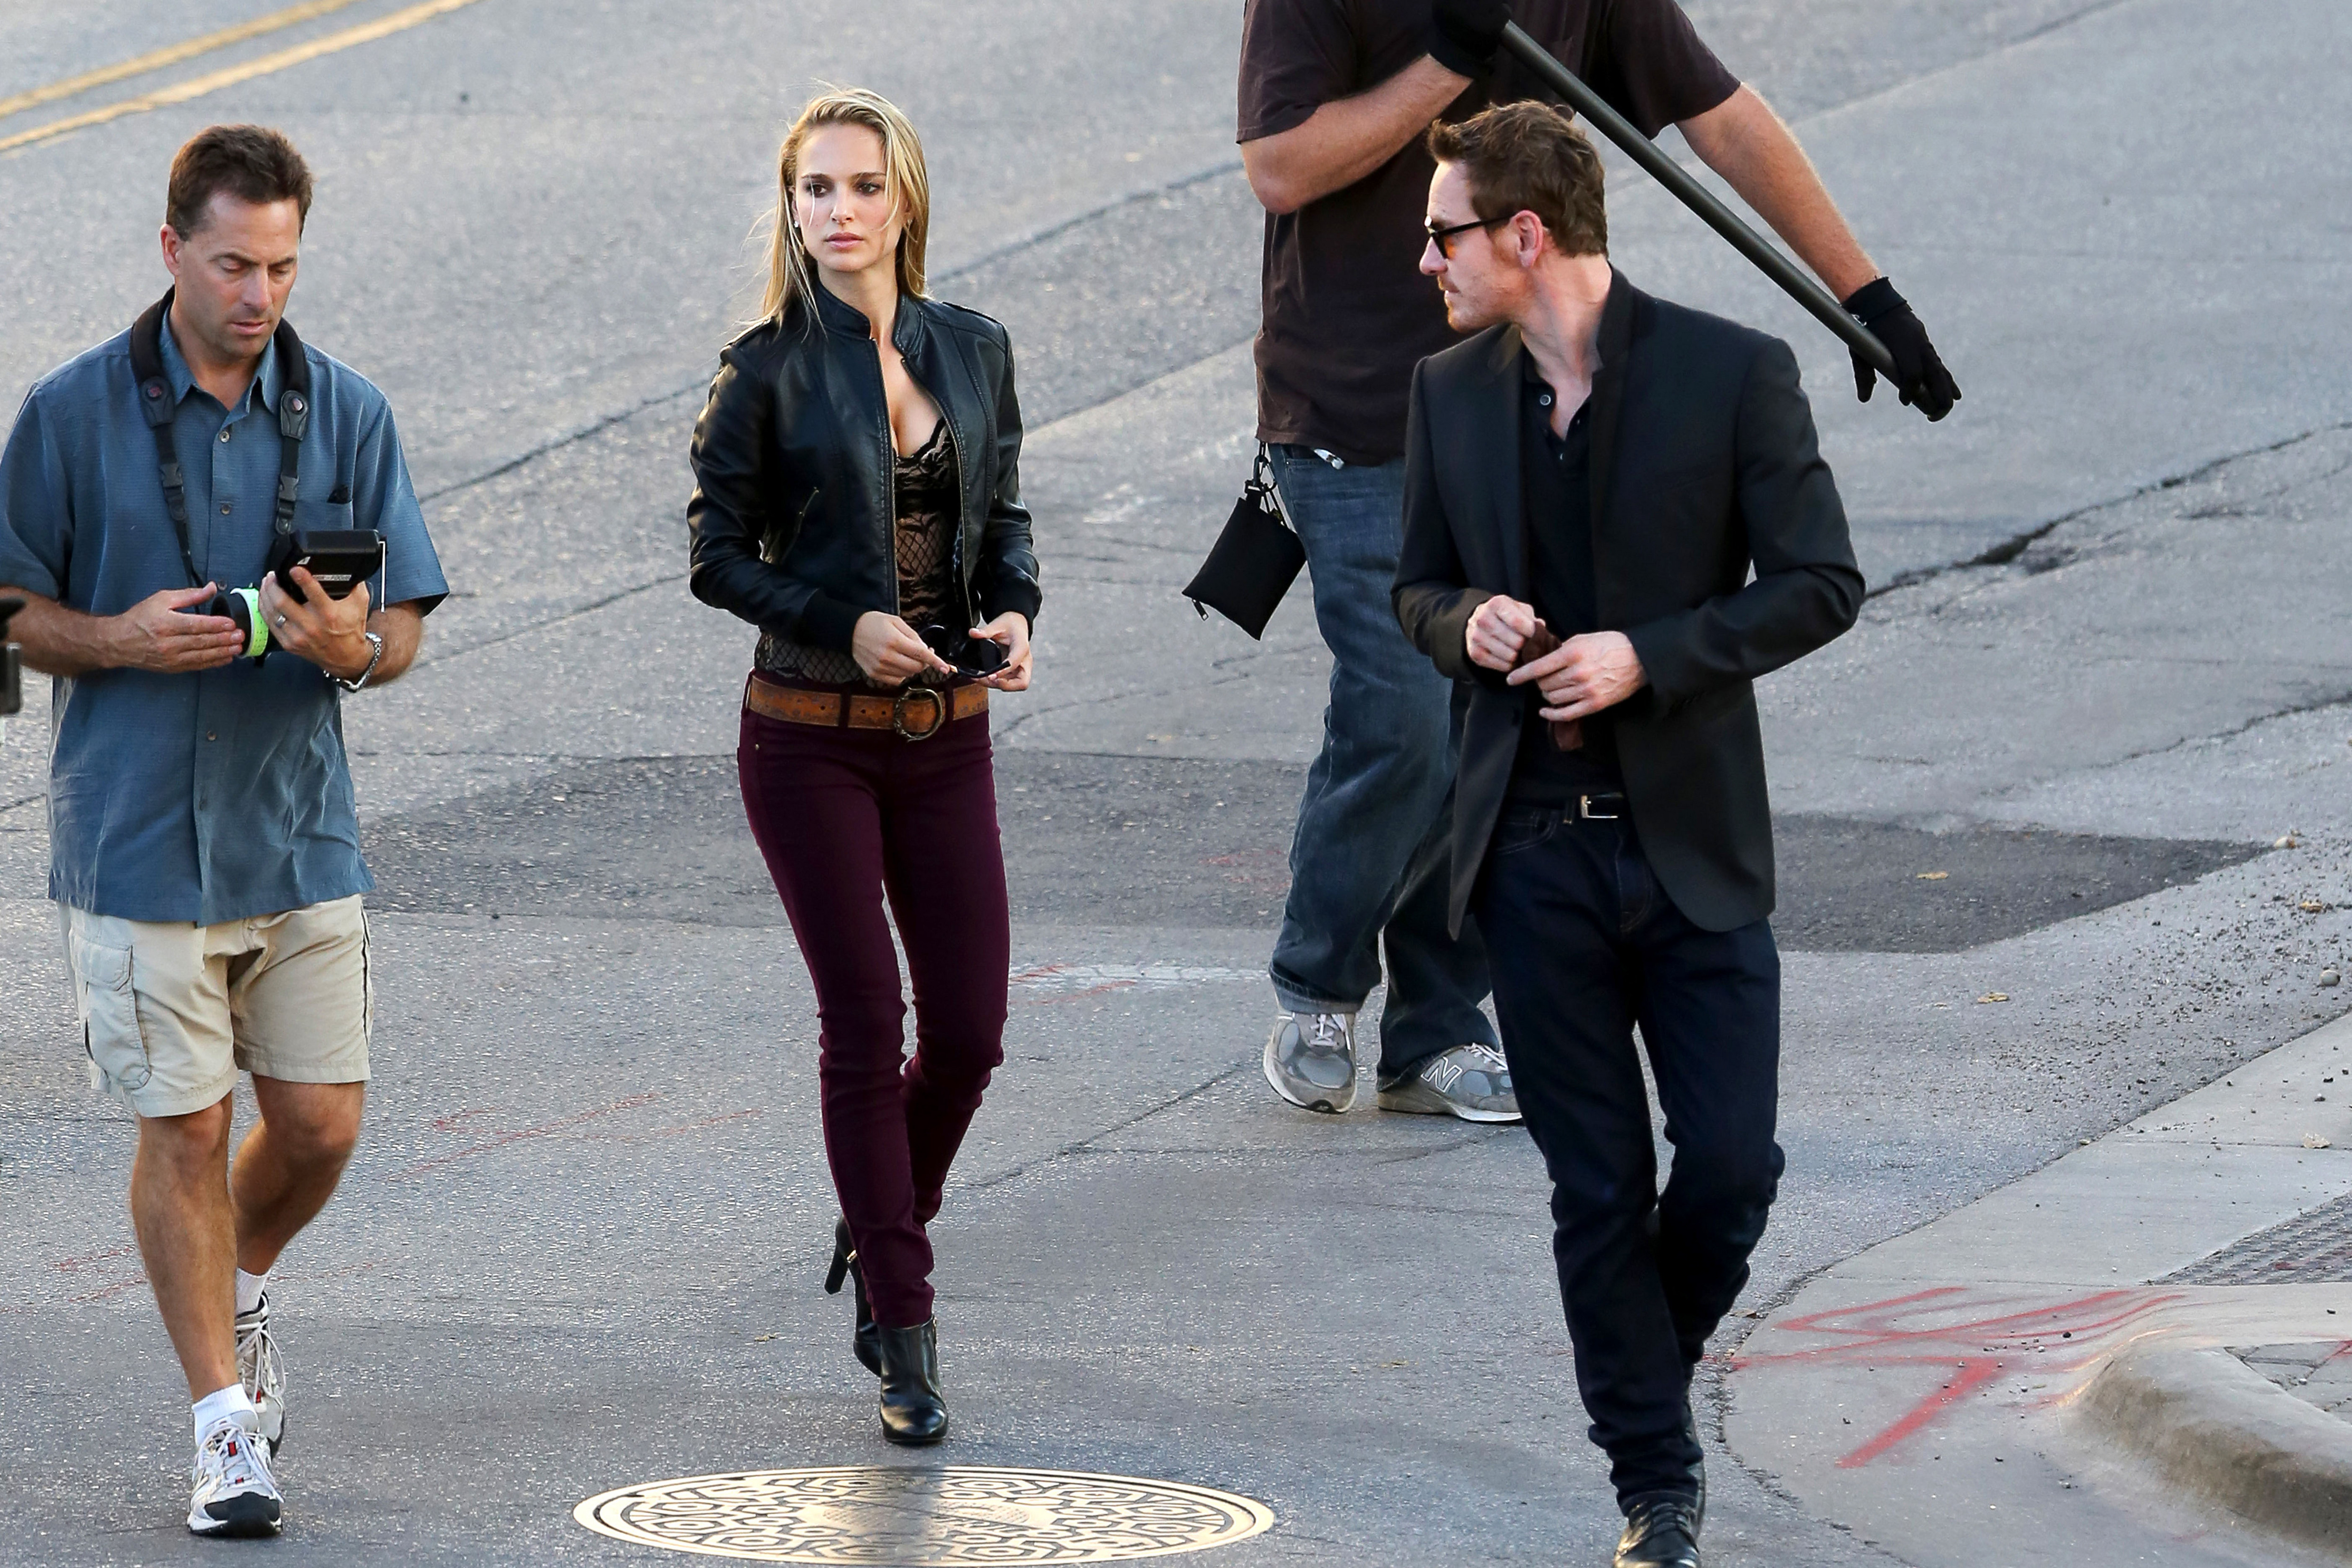 natalie portman Photo: Filming a scene with Michael Fassbender during a gam...